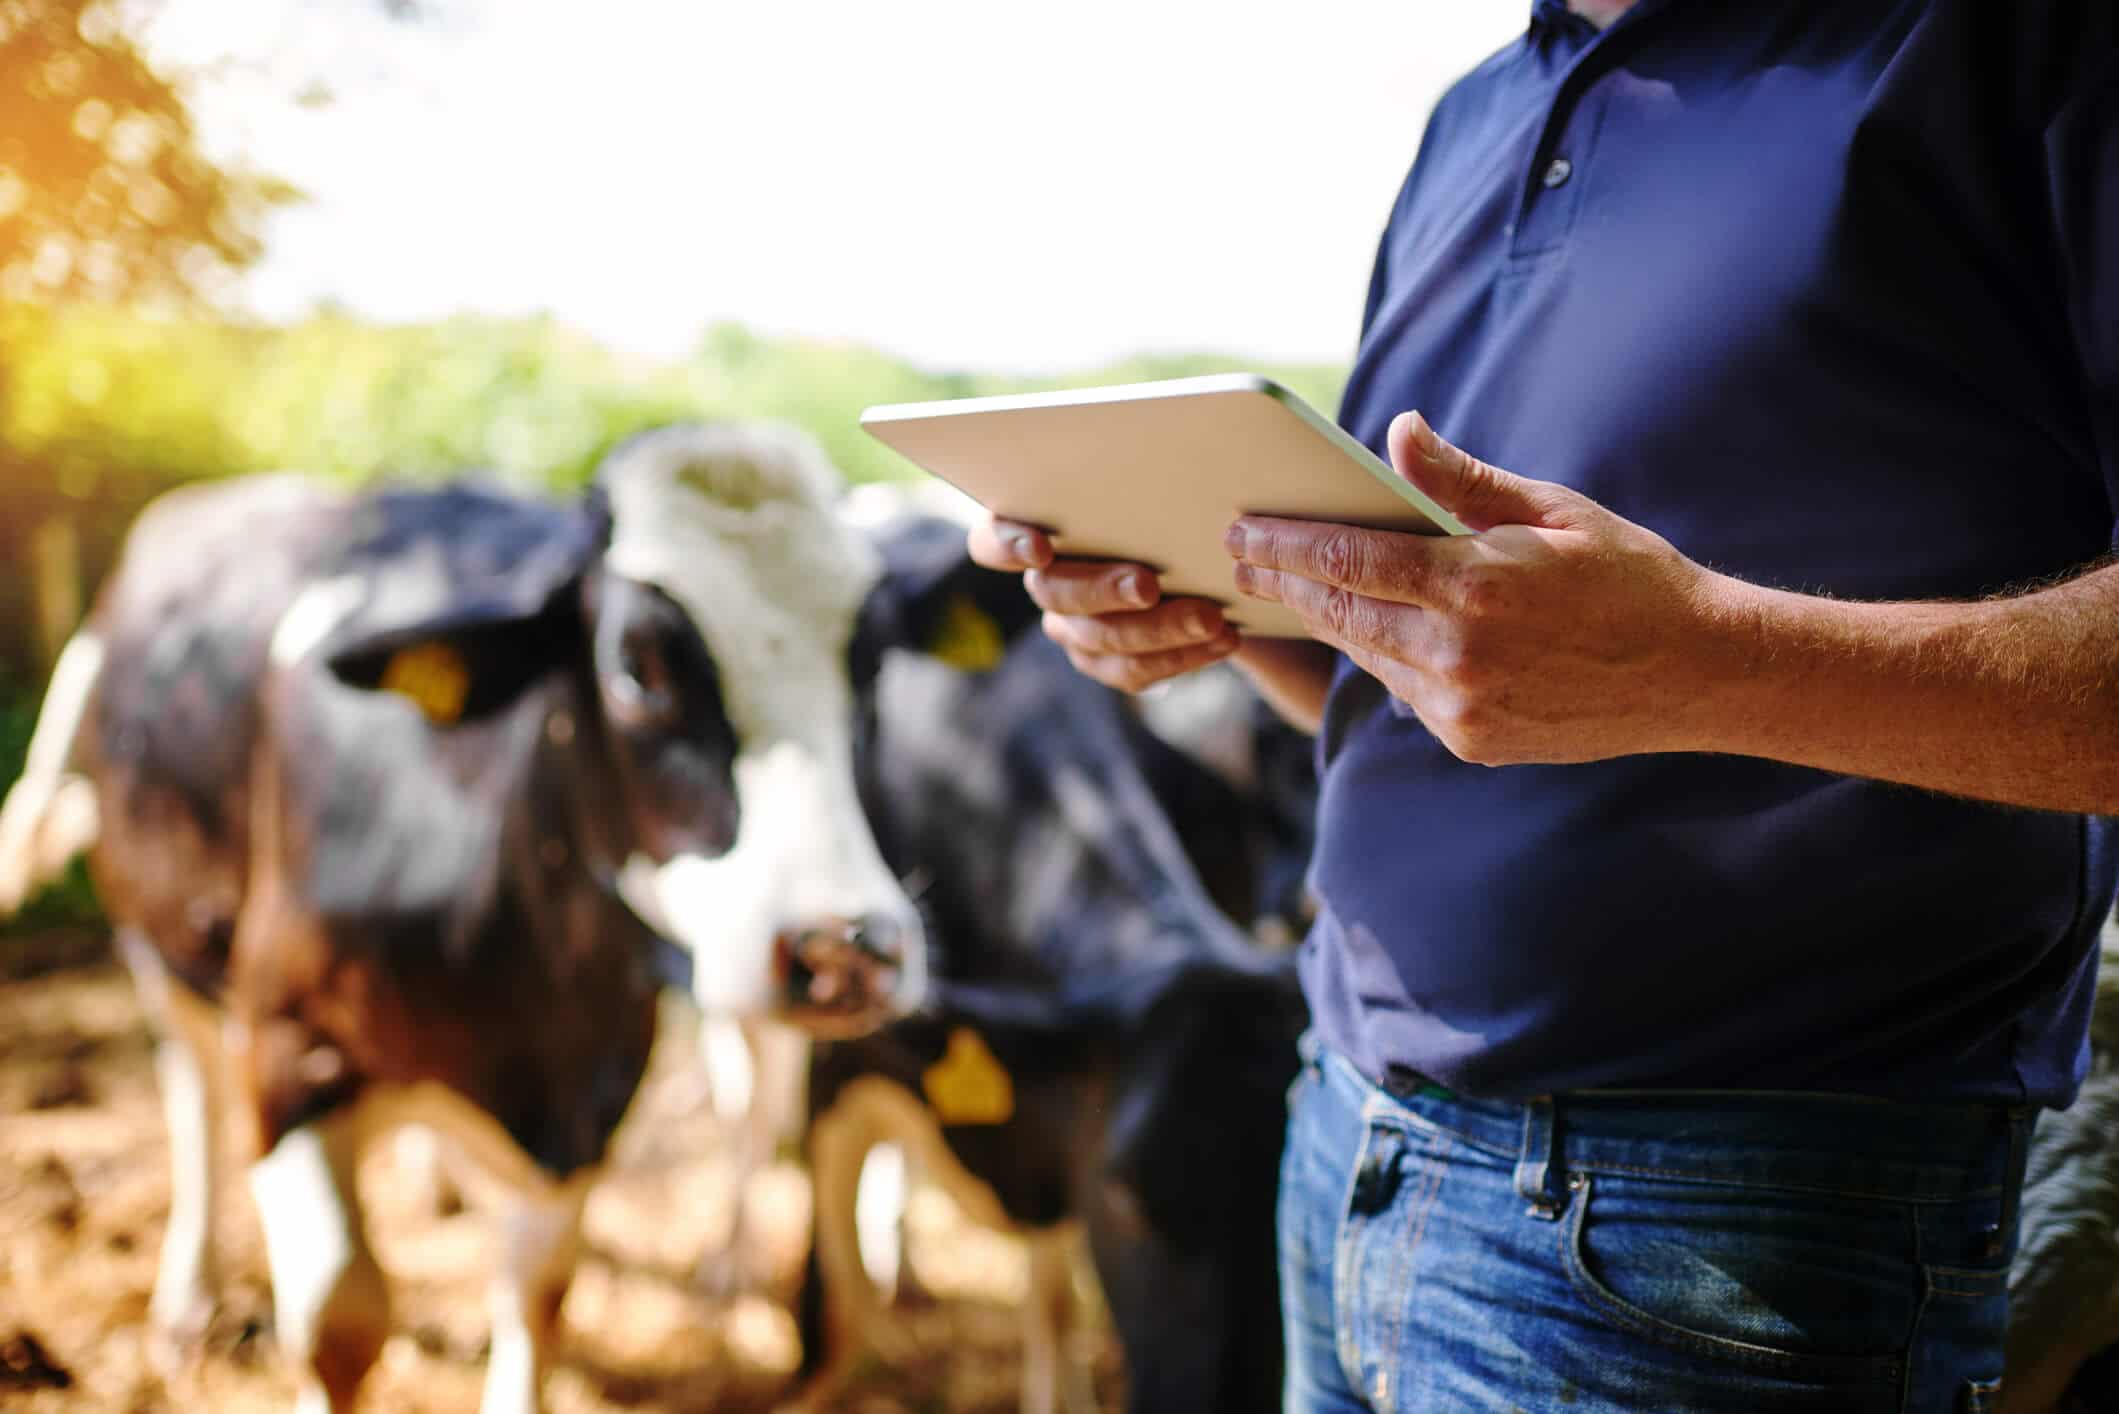 Man holding a tablet in front of cows